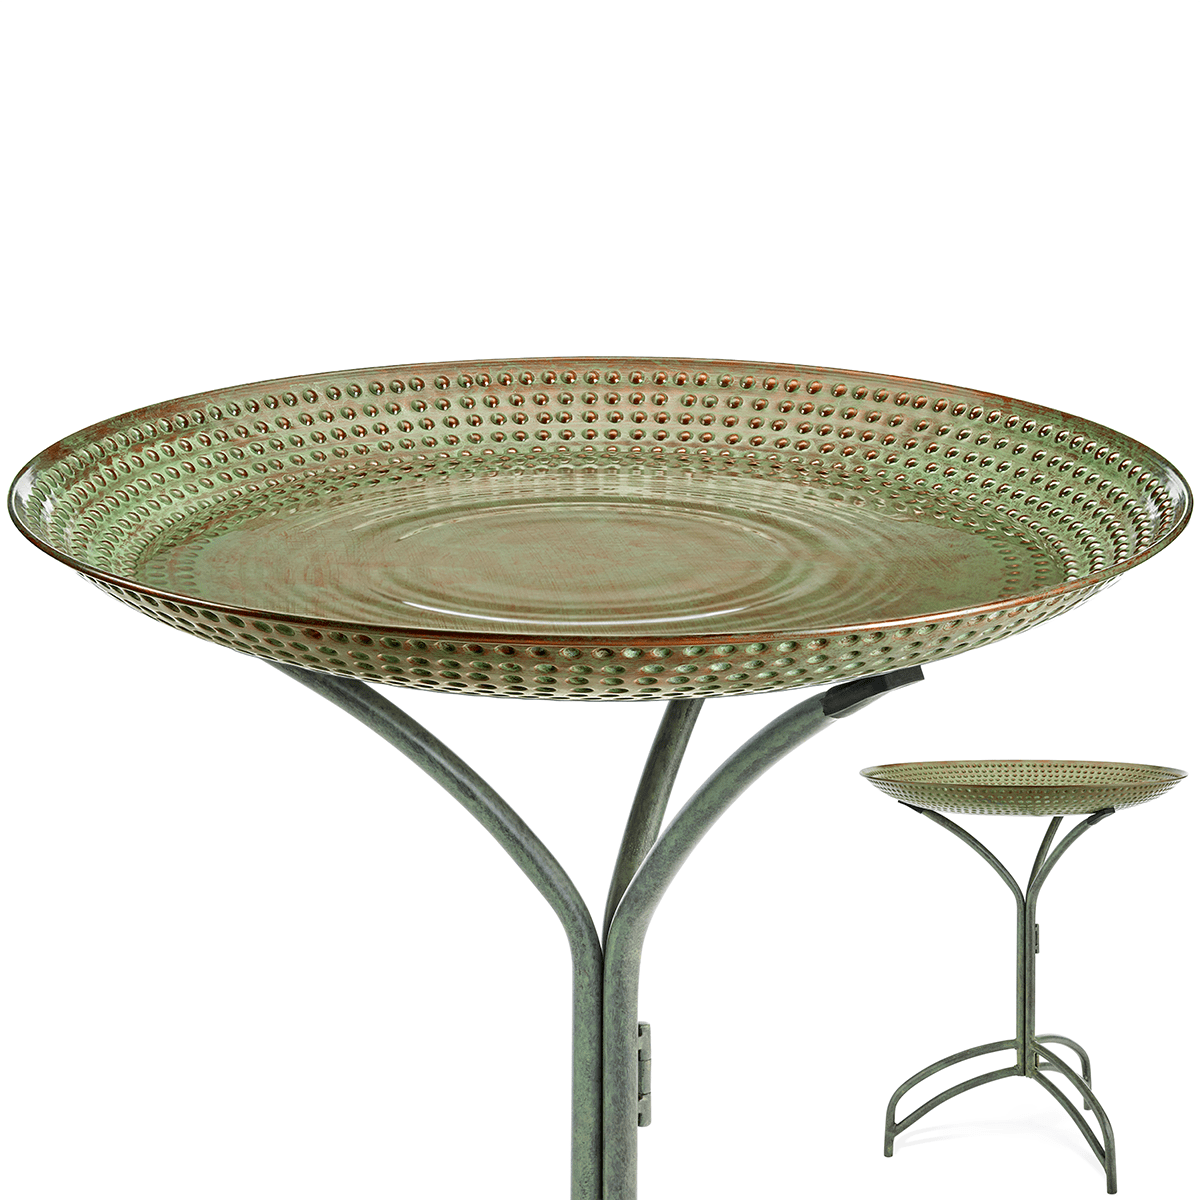 20" Blue Verde Copper Bird Bath with Stand - Good Directions